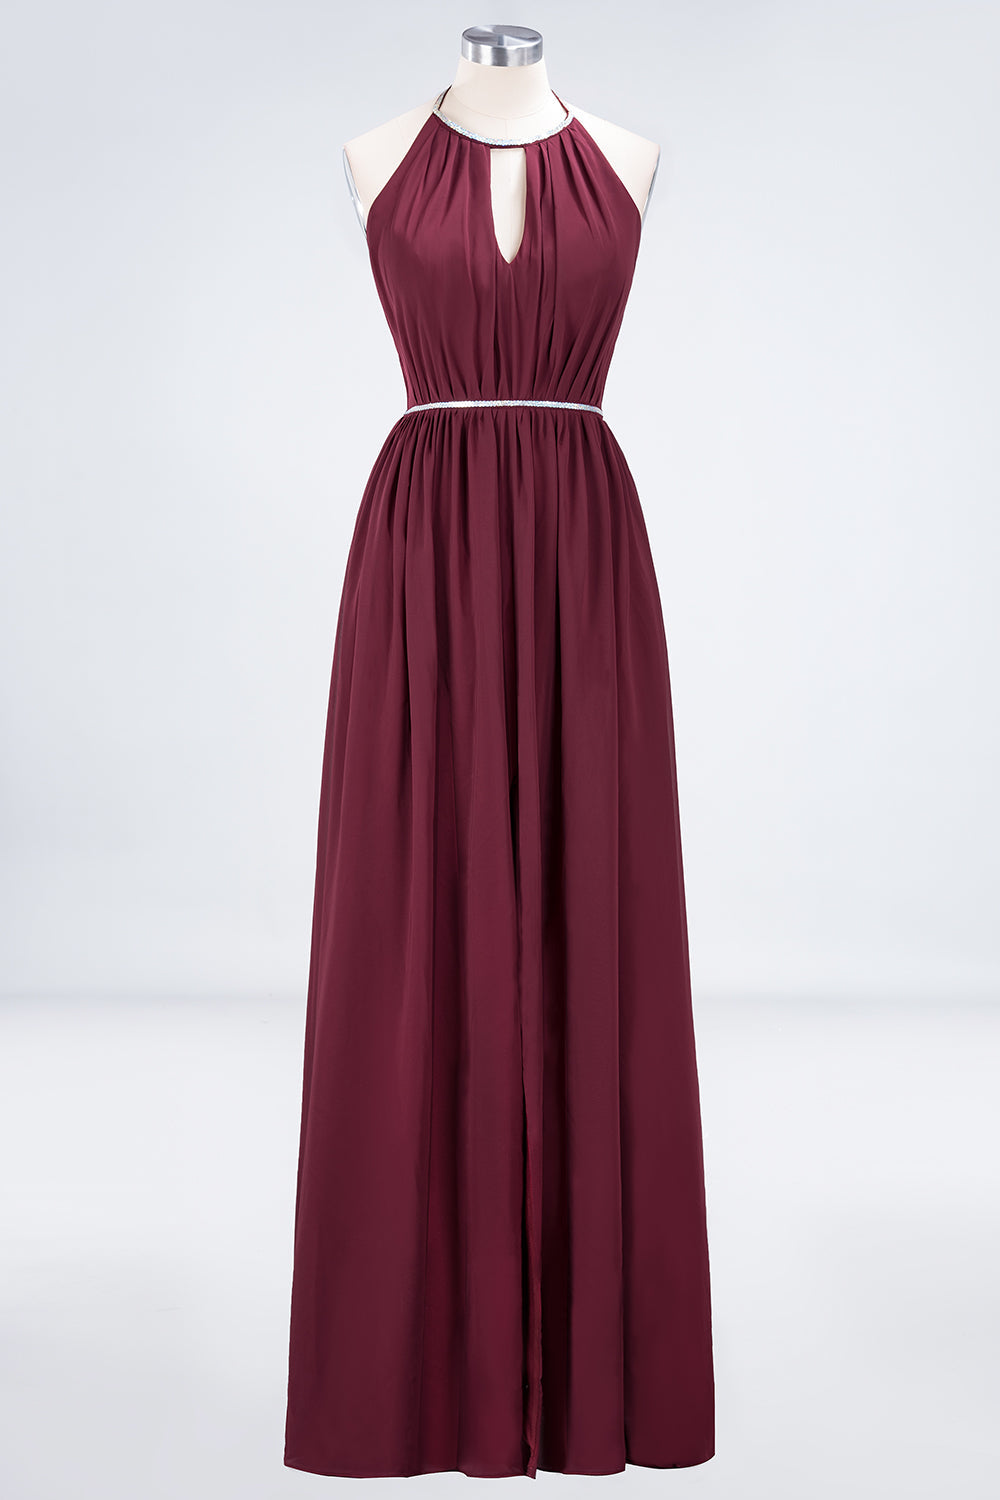 Chic Burgundy Halter Long Backless Bridesmaid Dress with Beadings-27dress